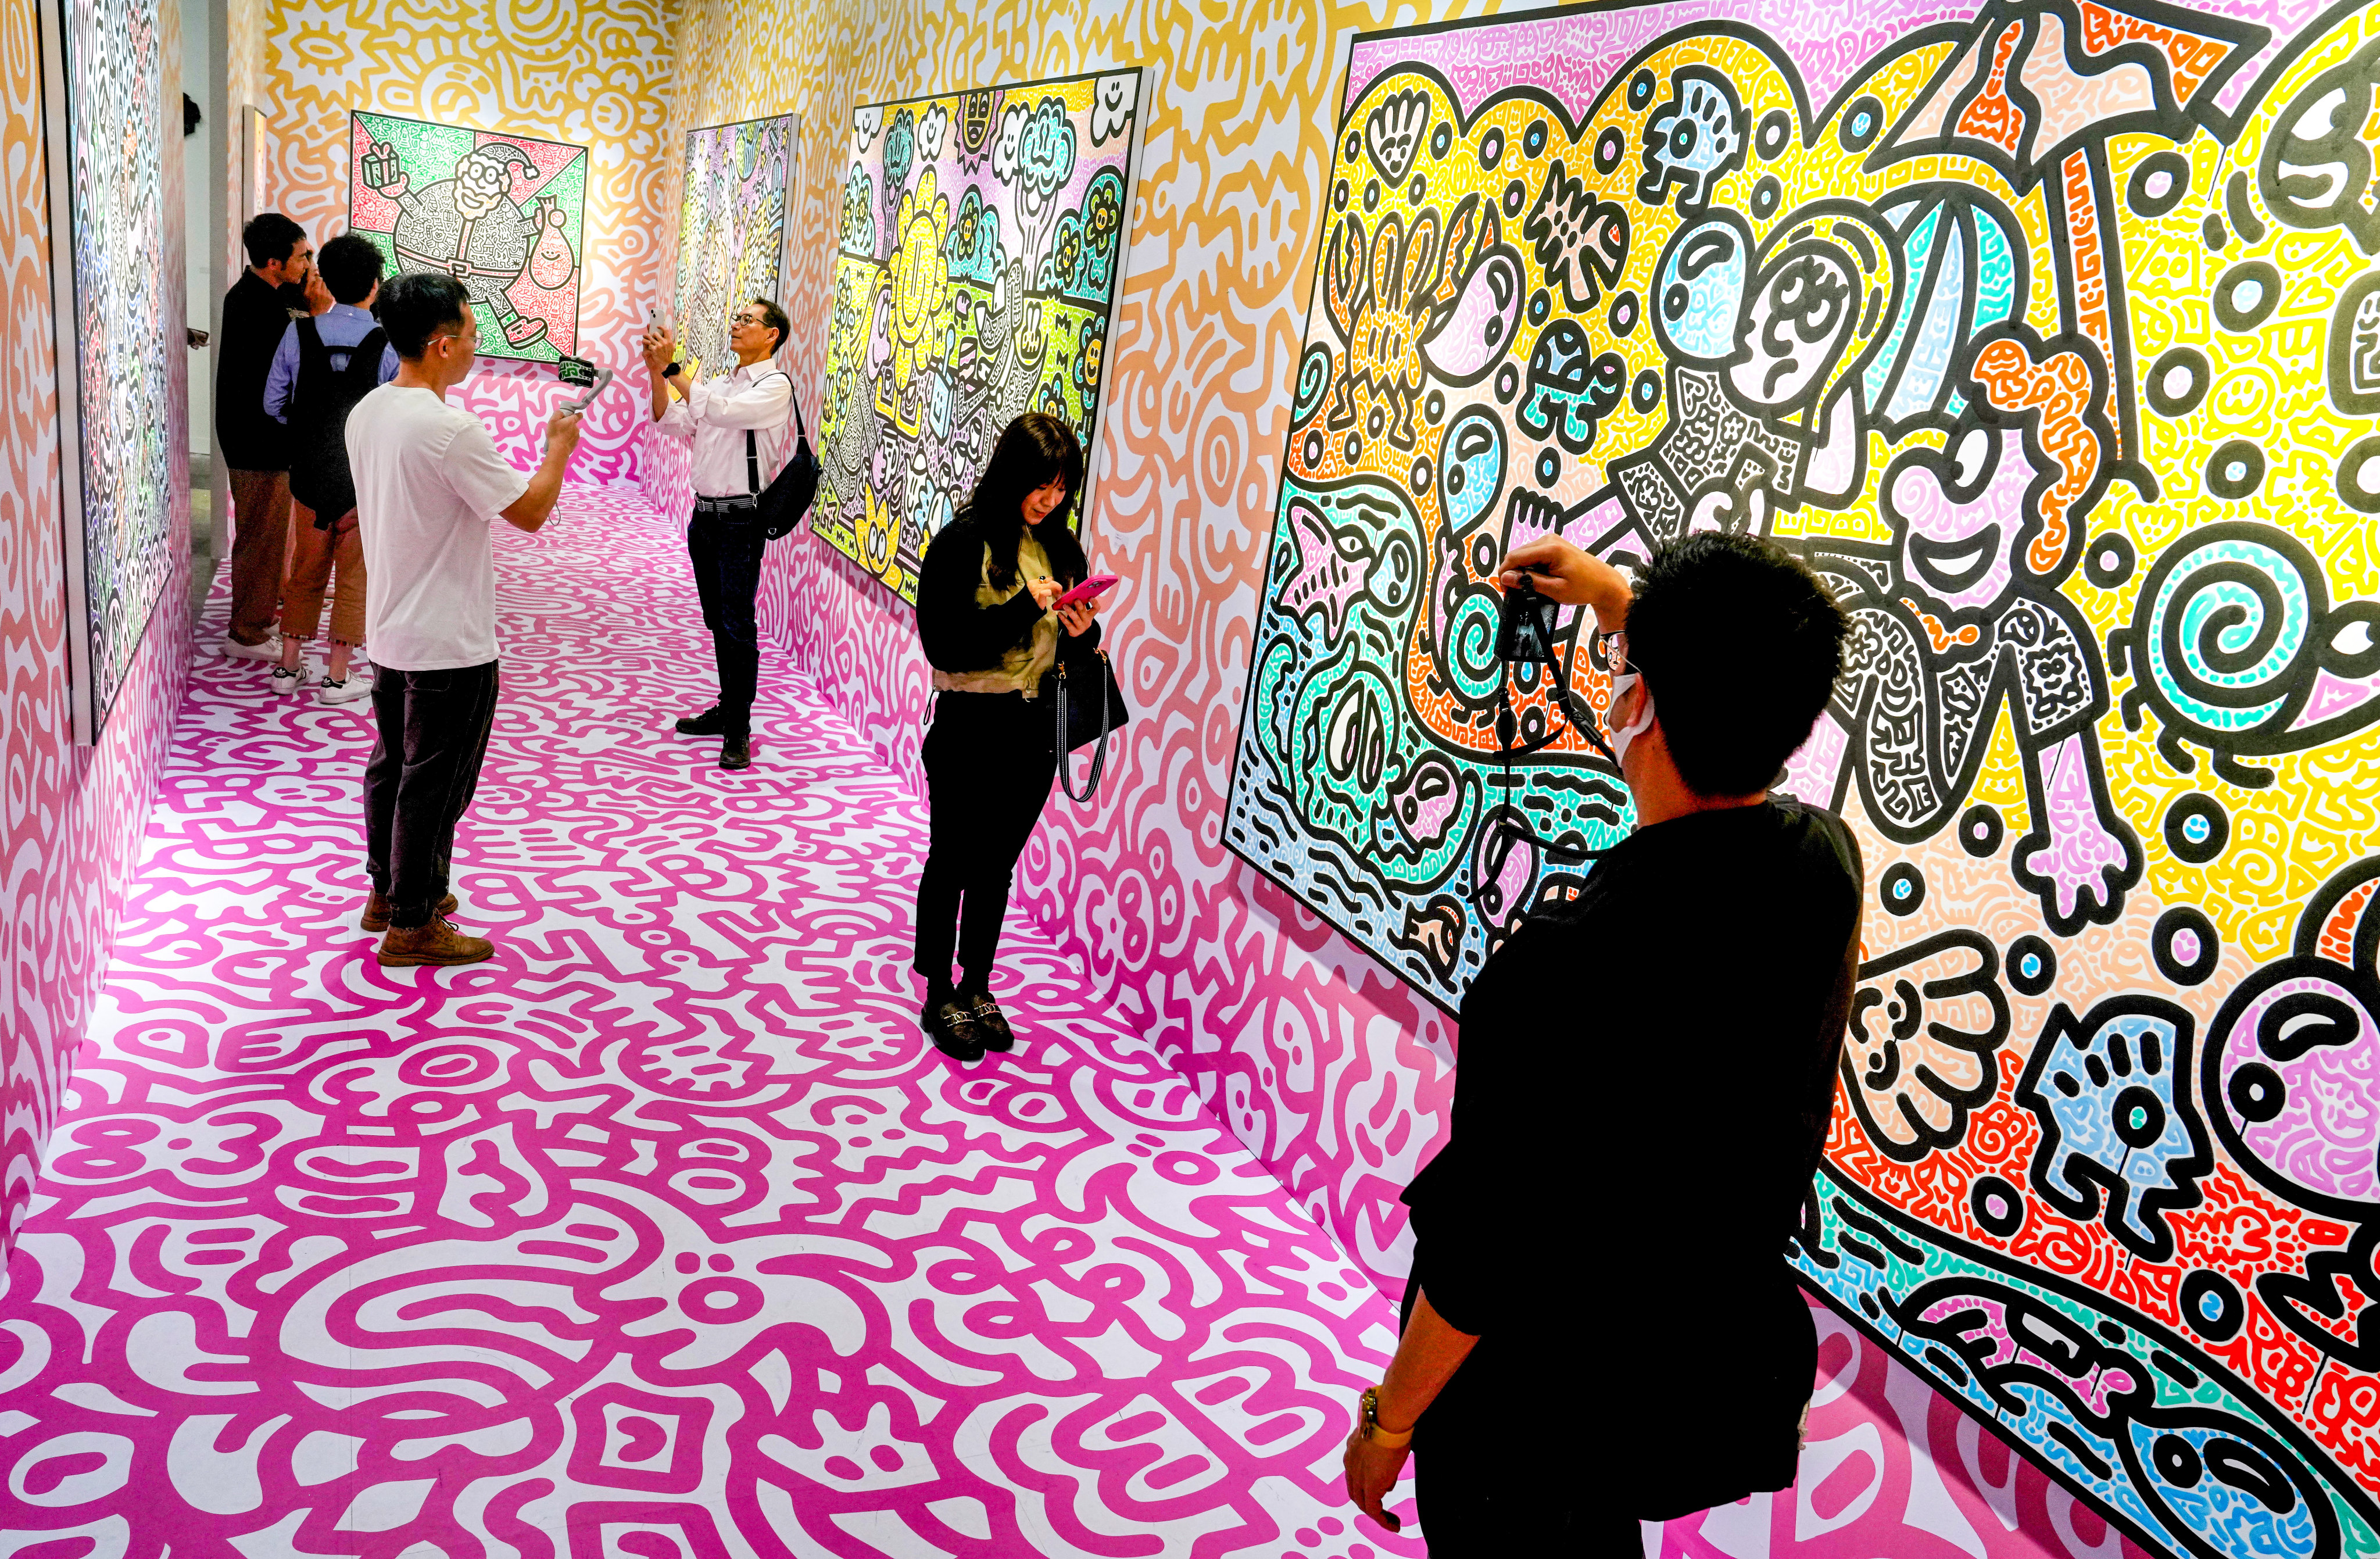 Artworks by MR. DOODLE at Art Basel Hong Kong. West Kowloon arts hub will sign deals with 22 cultural institutions. Photo: Elson Li